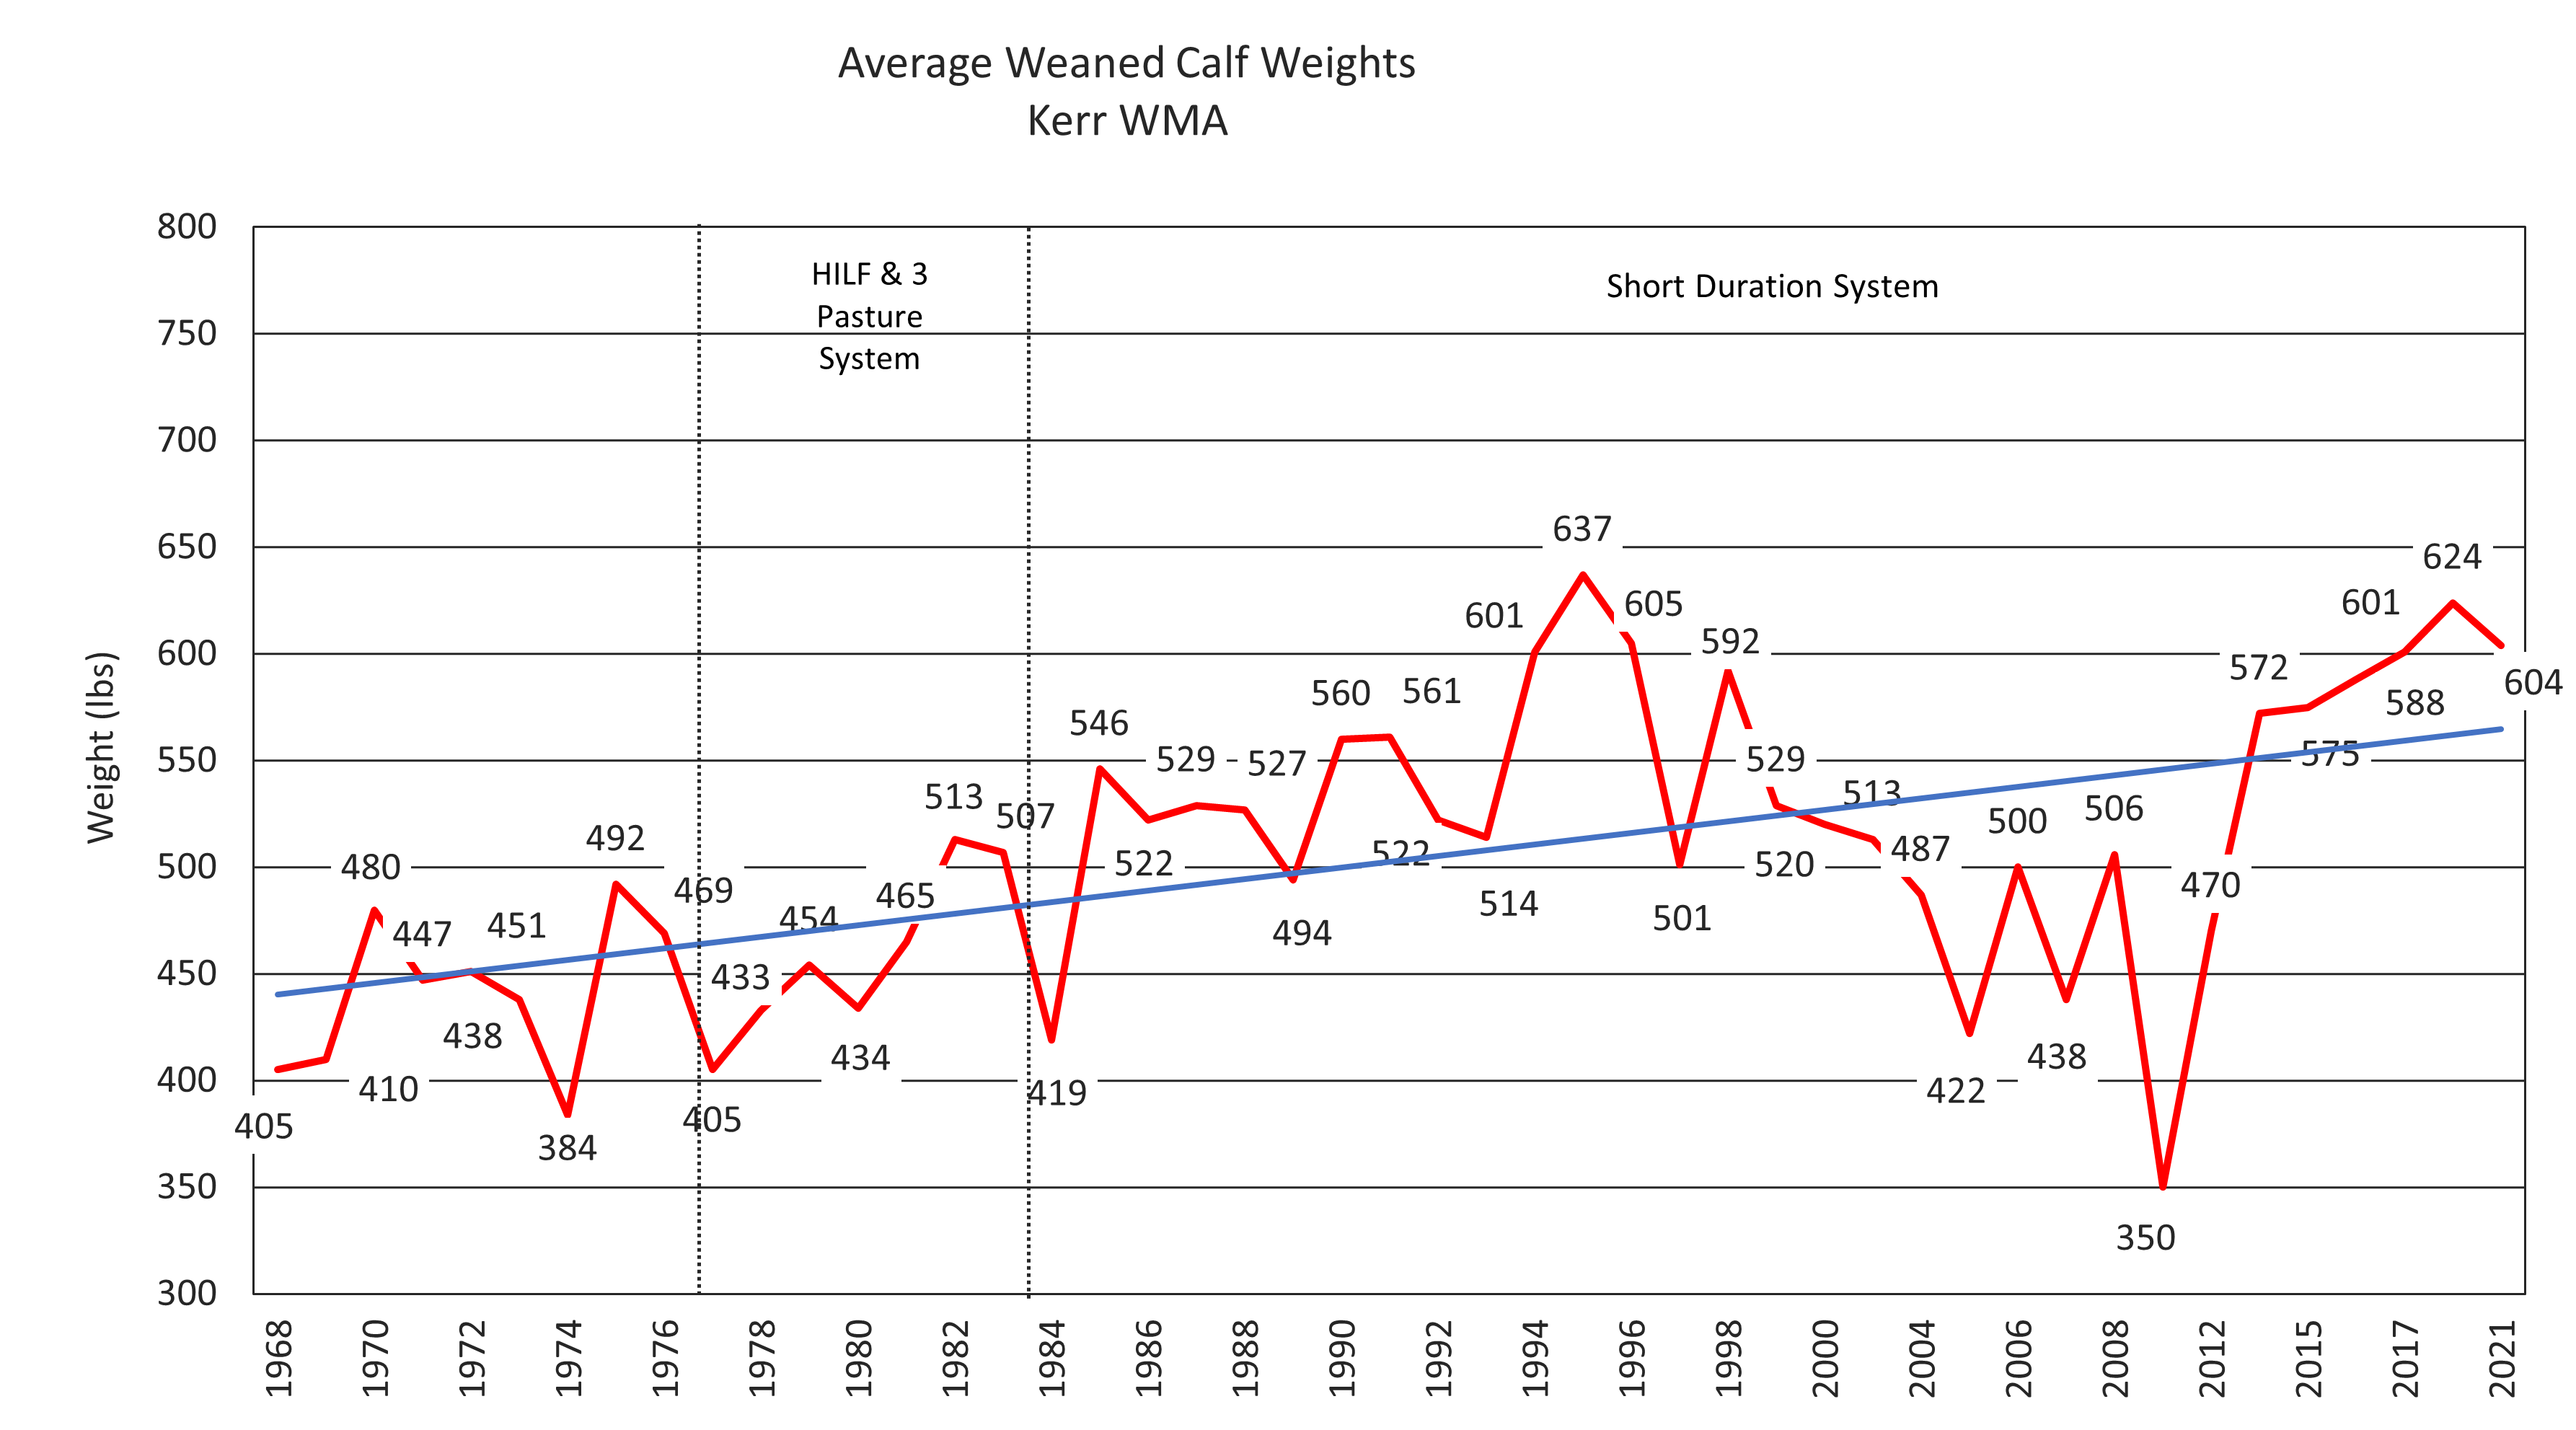 Chart showing the average calf weights on Kerr WMA